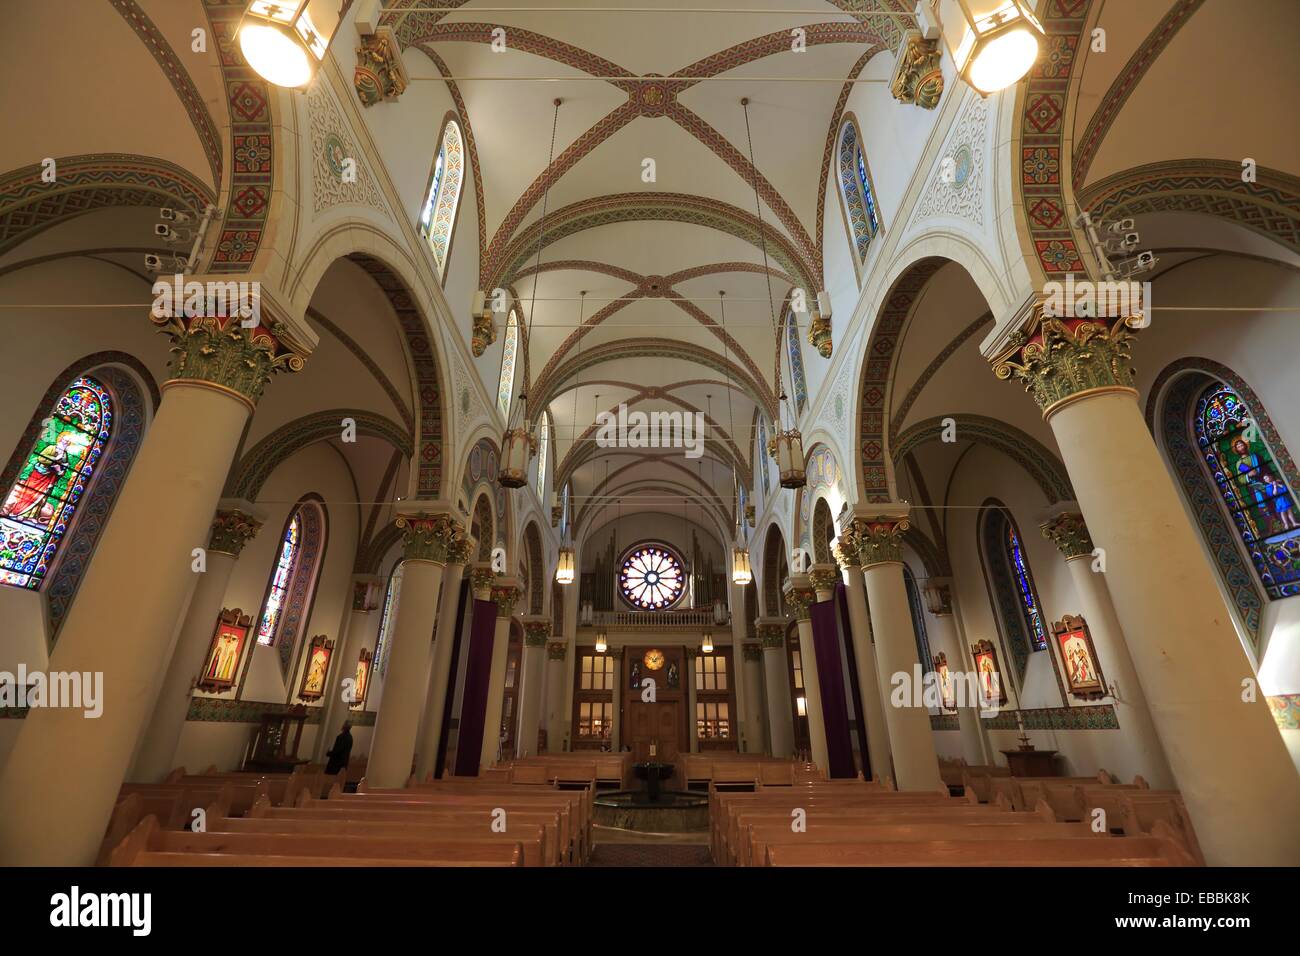 The interior view of the Cathedral Basilica of St. Francis of Assisi. Santa Fe. New Mexico. USA. Stock Photo